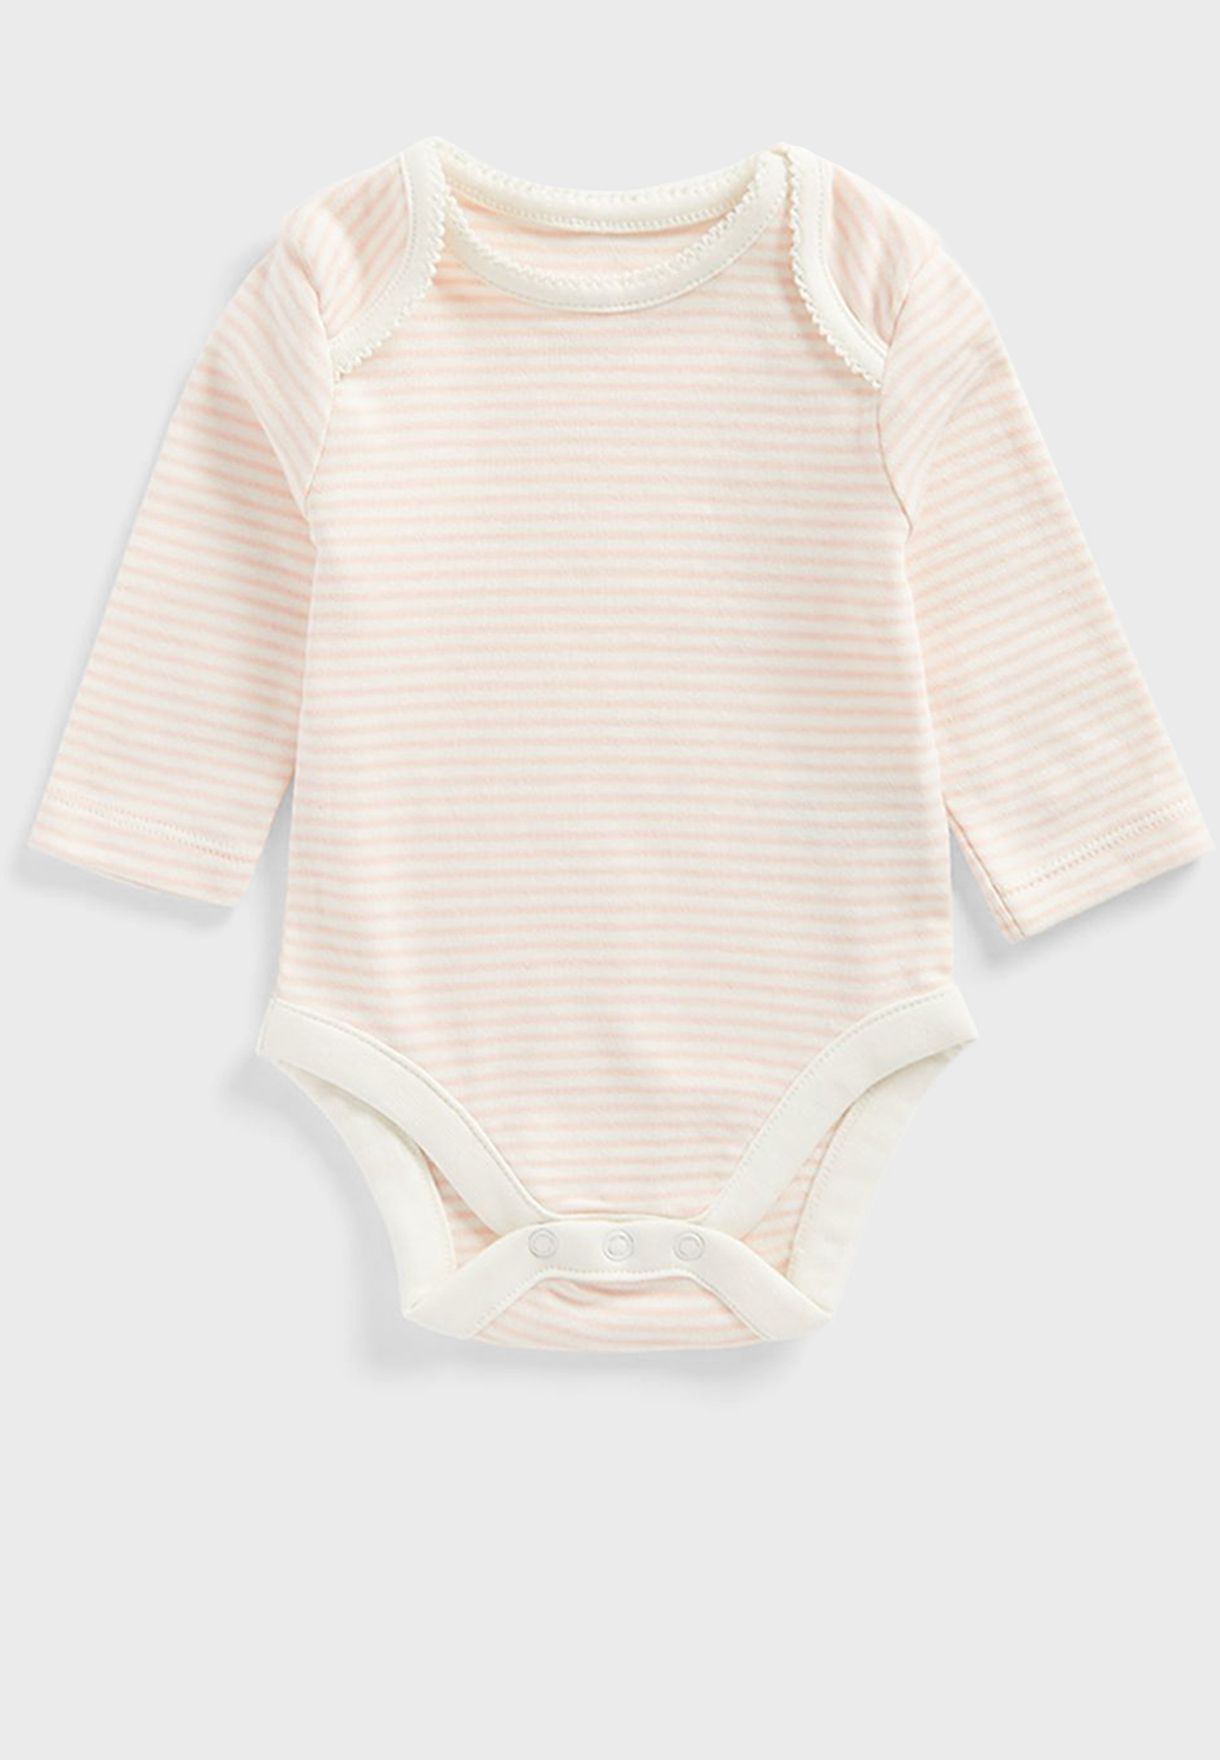 Infant Printed Rompers